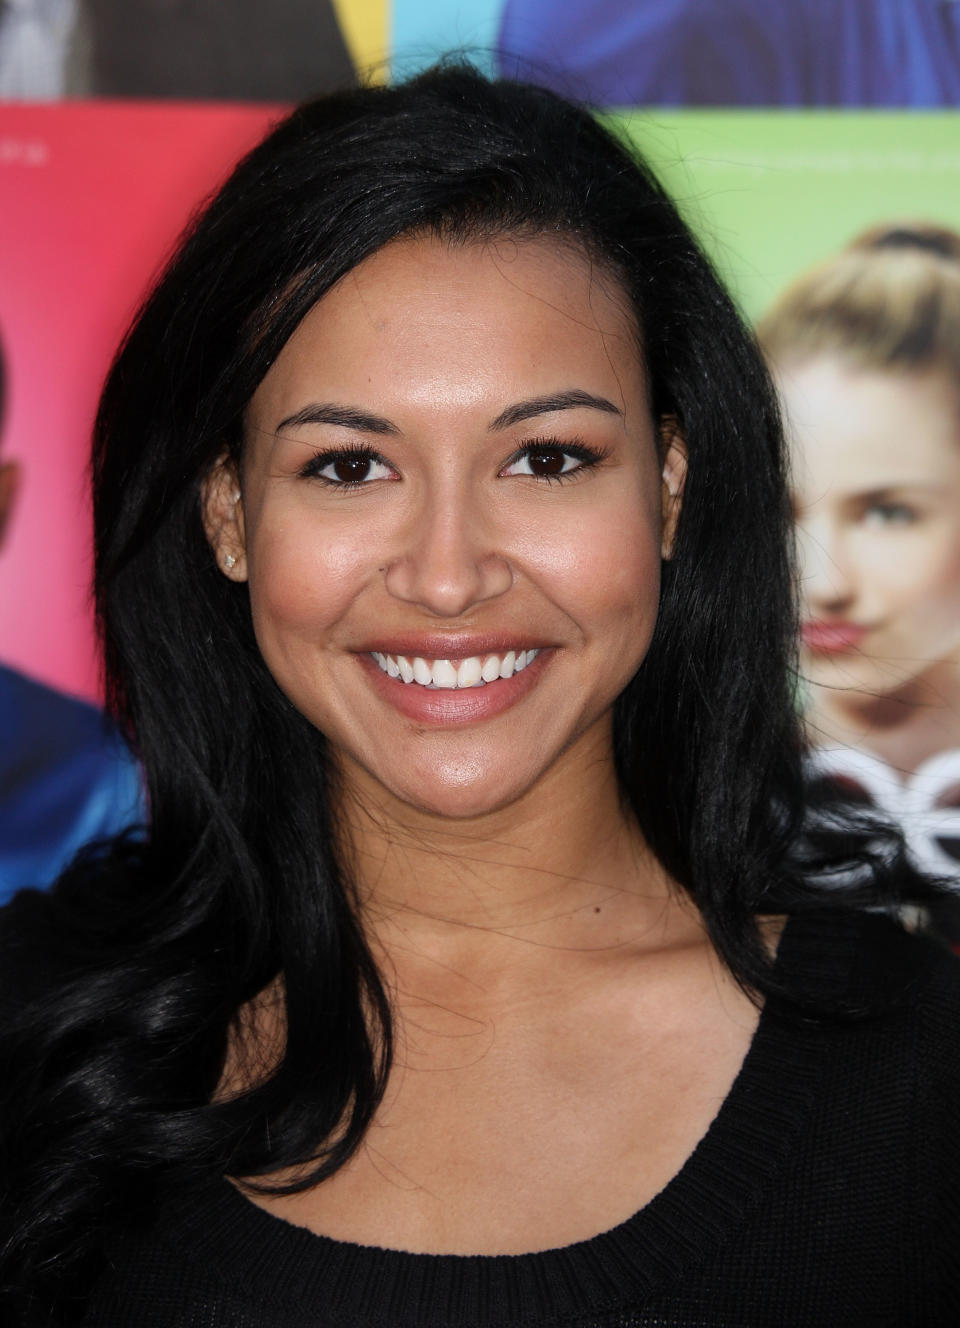 Actress Naya Rivera attends the screening of "Glee" at the Santa Monica High School Amphitheater on May 11, 2009, in Santa Monica, California. (Photo by Frederick M. Brown/Getty Images)